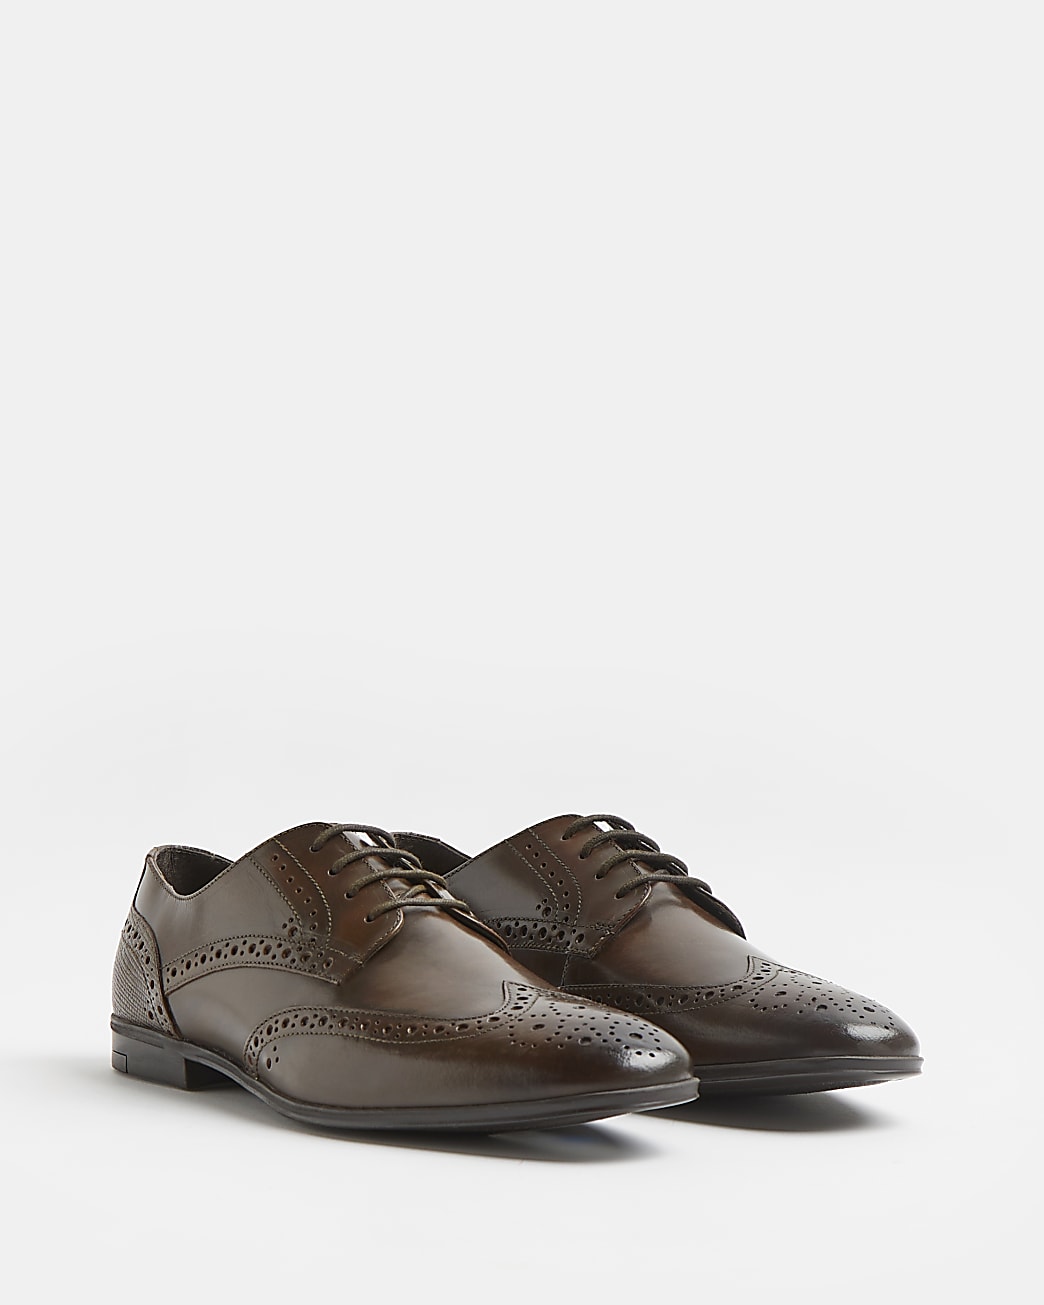 RIVER ISLAND BROWN LACE UP LEATHER BROGUE DERBY SHOES